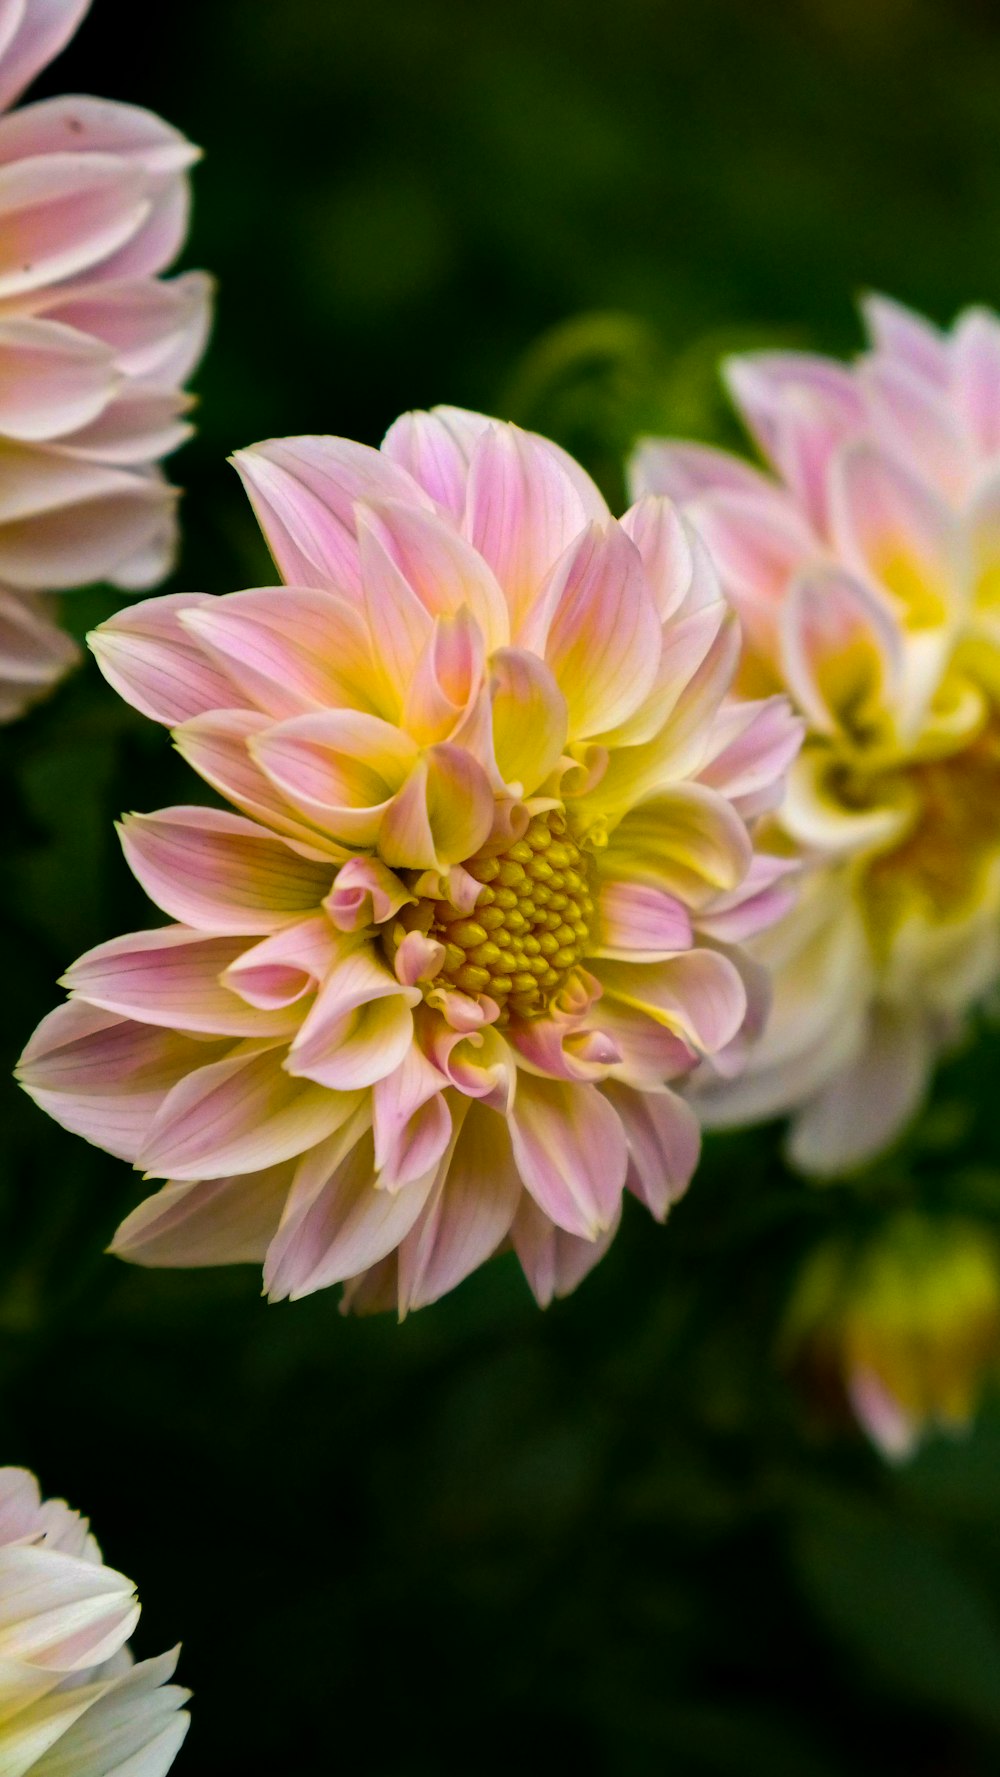 pink and yellow flower in macro shot